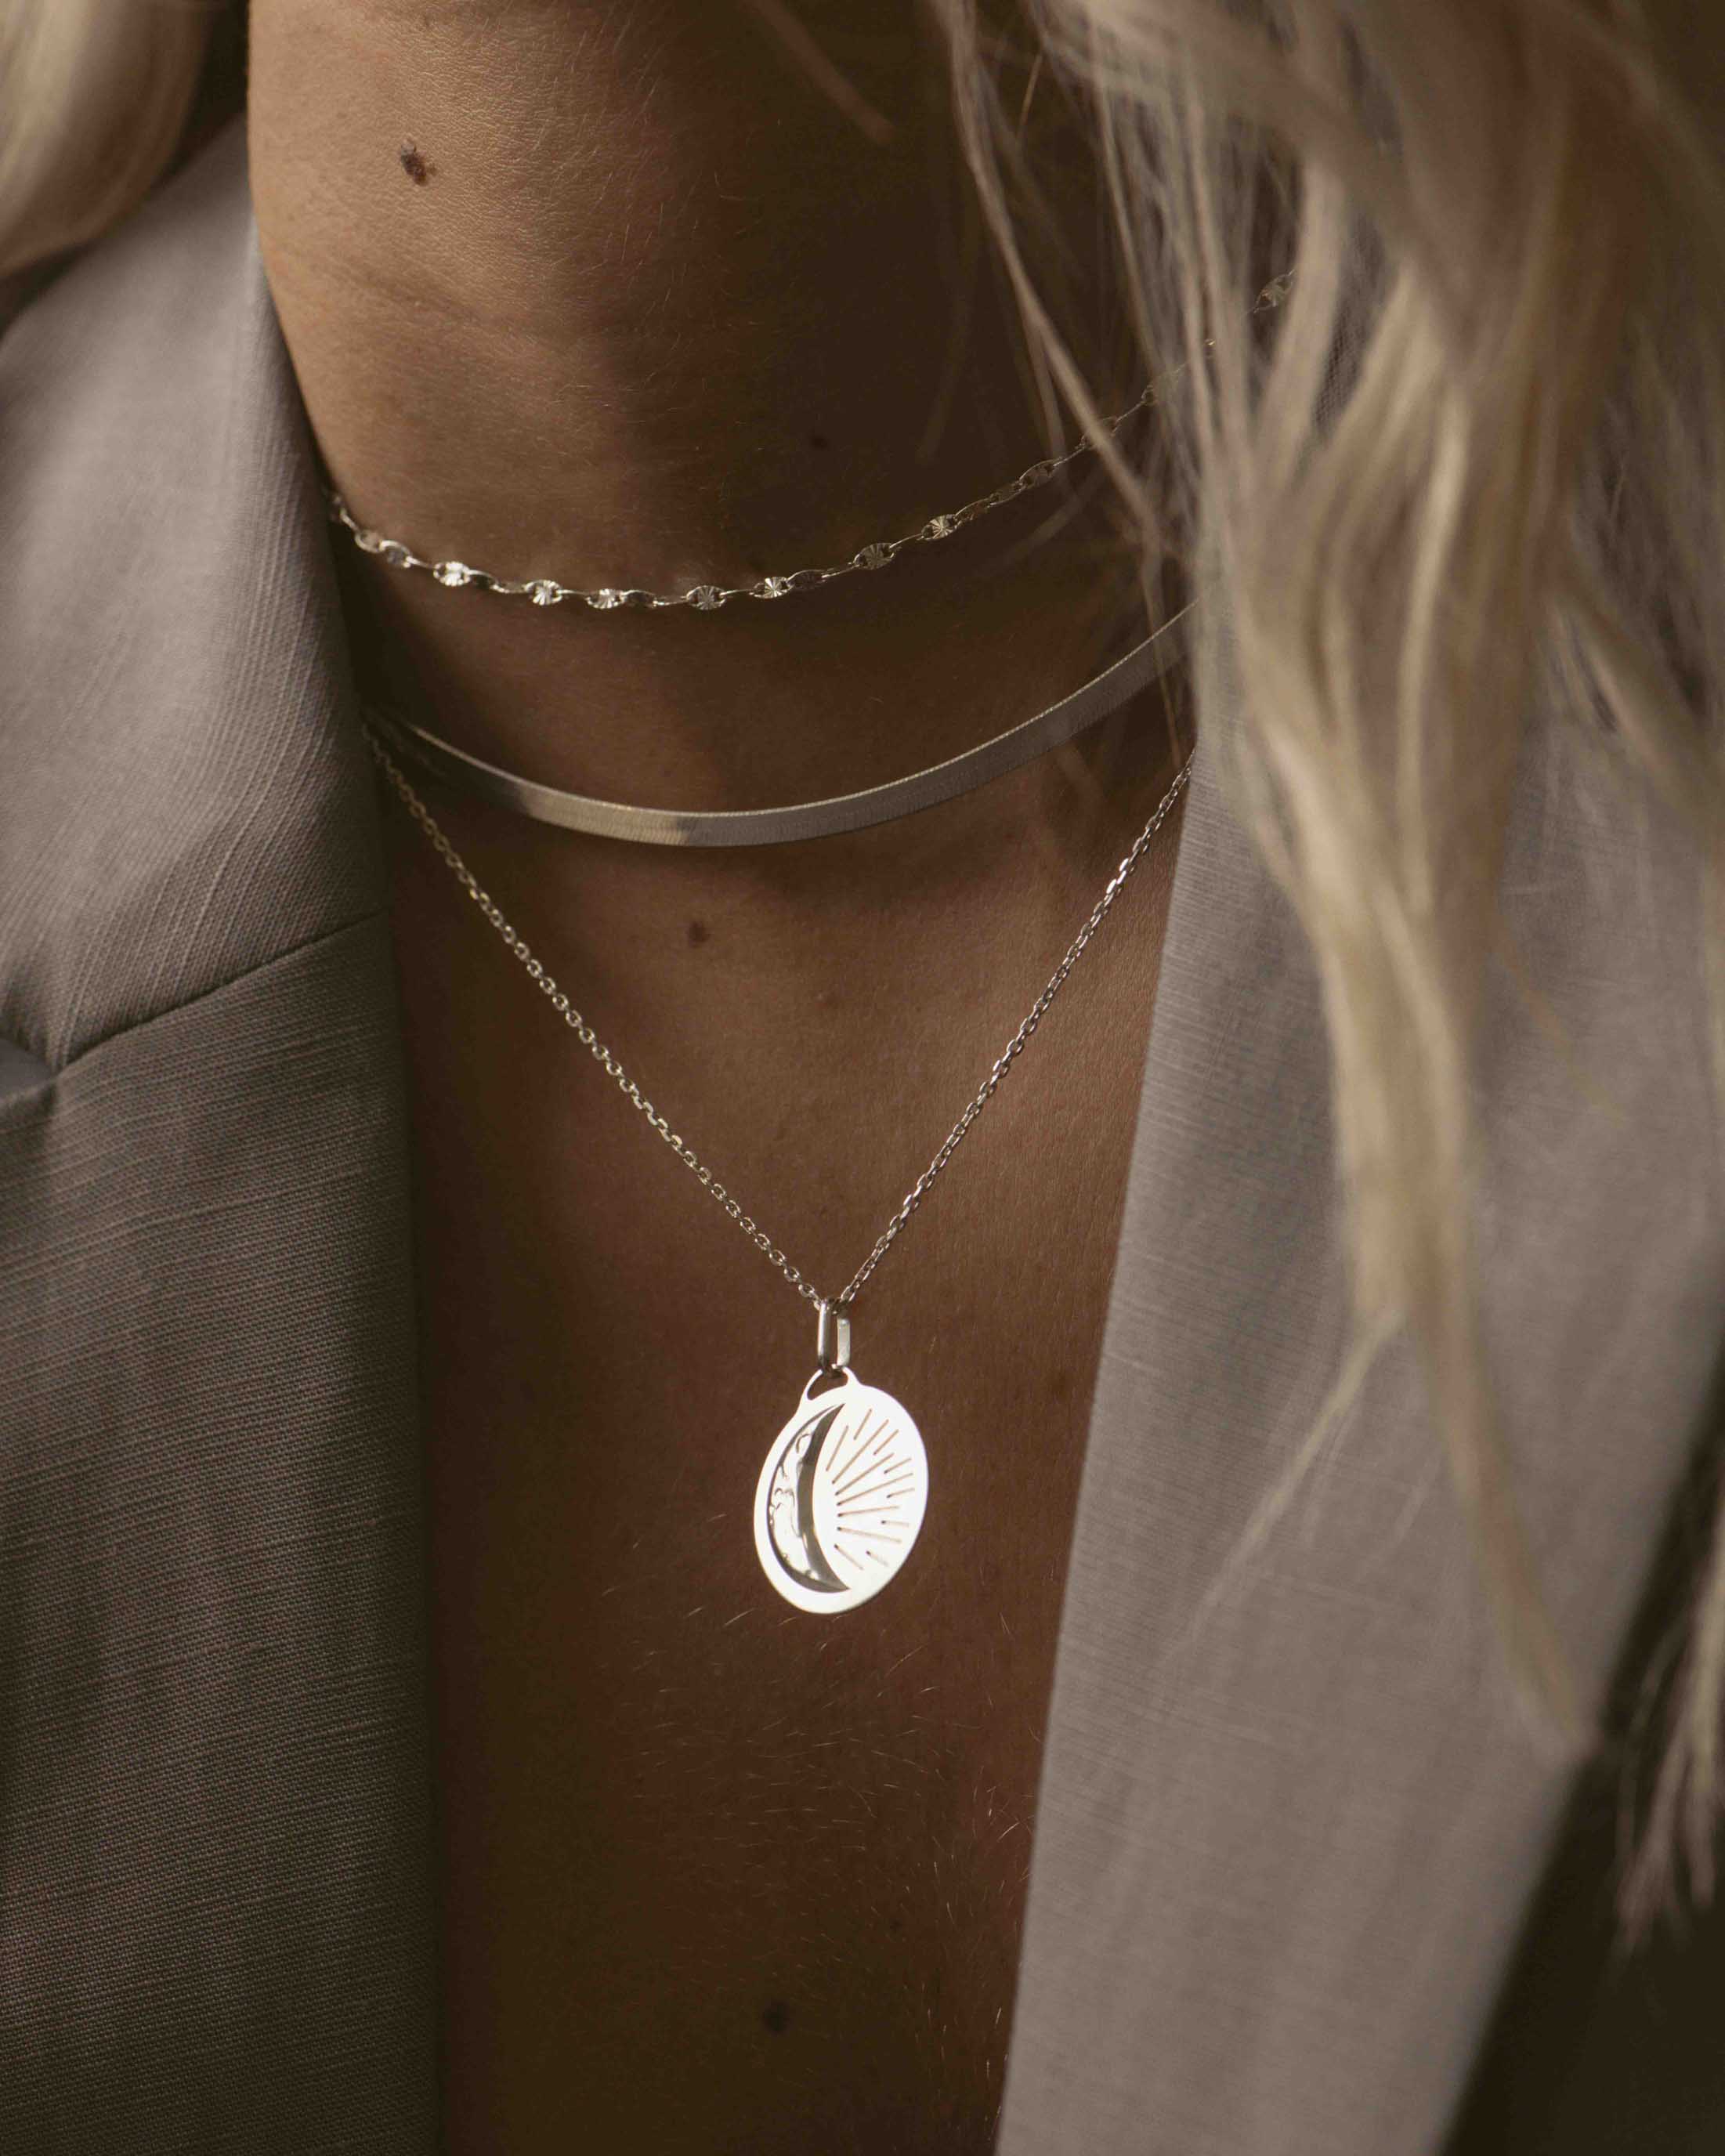 Baly necklace